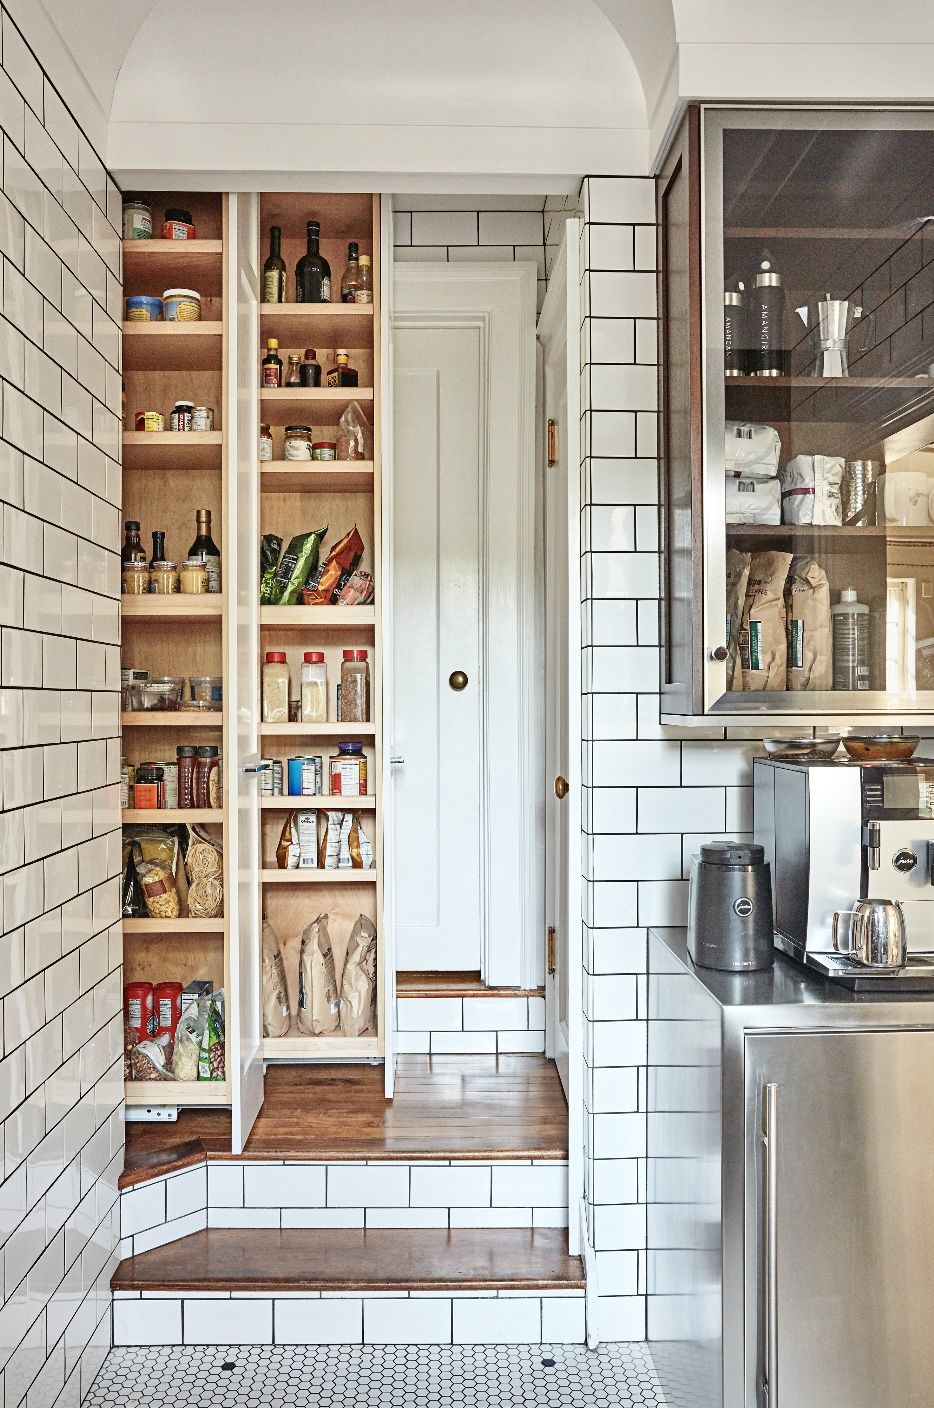 Genius Subway Tile Ideas Are Worth Recreating in Your Own Kitchen ...